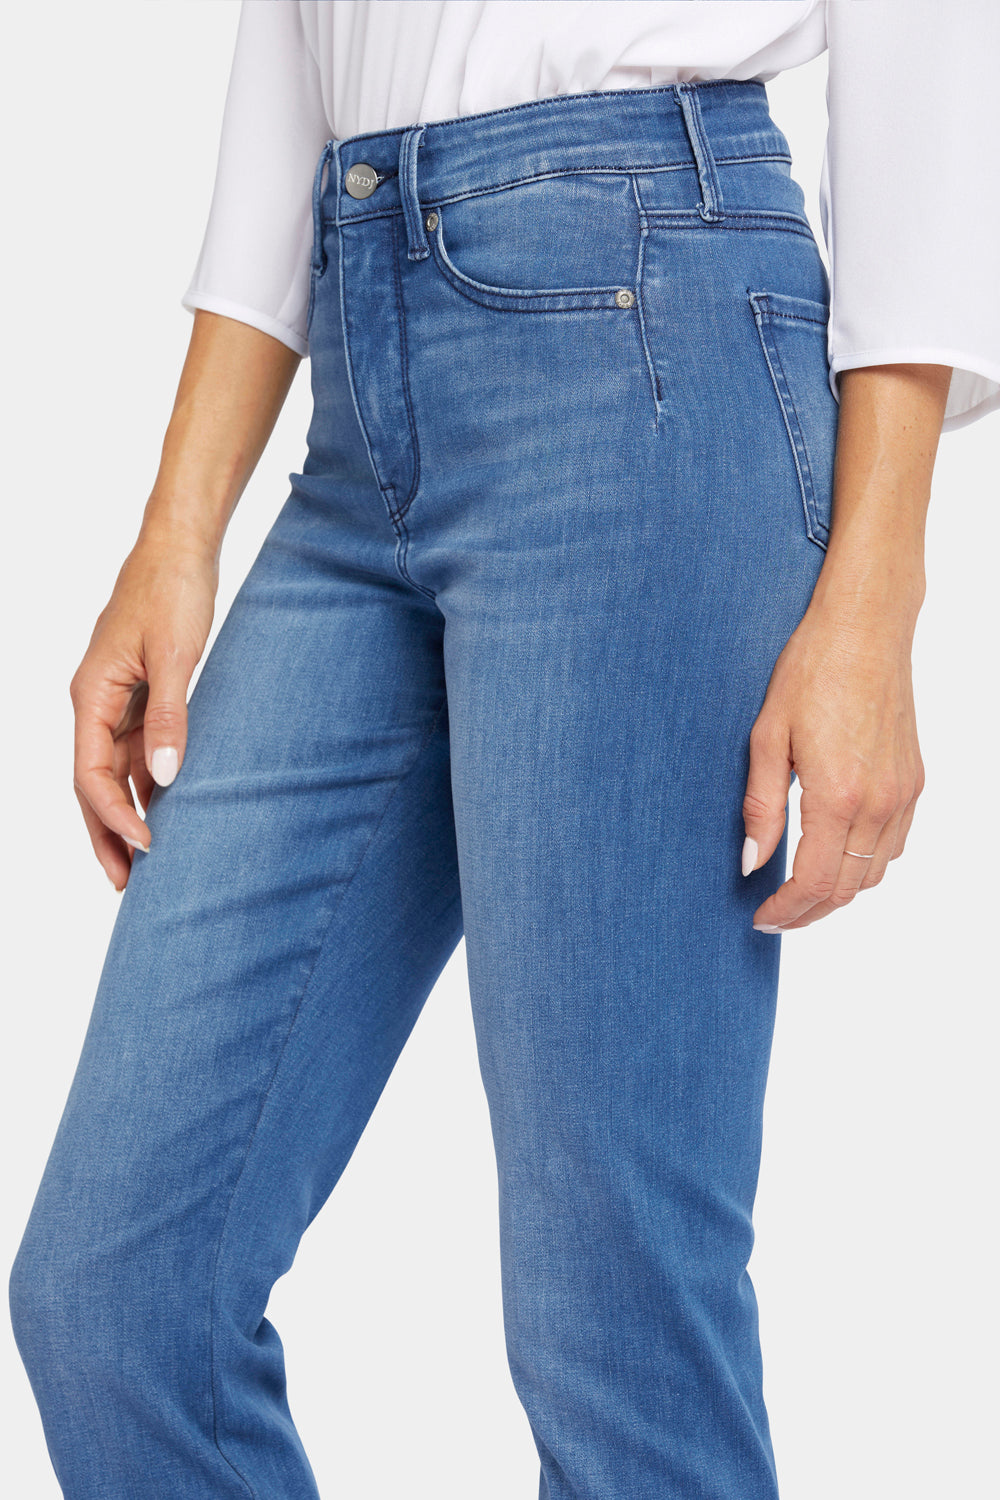 Le Silhouette Slim Bootcut Jeans With High Rise - Amour Blue | NYDJ